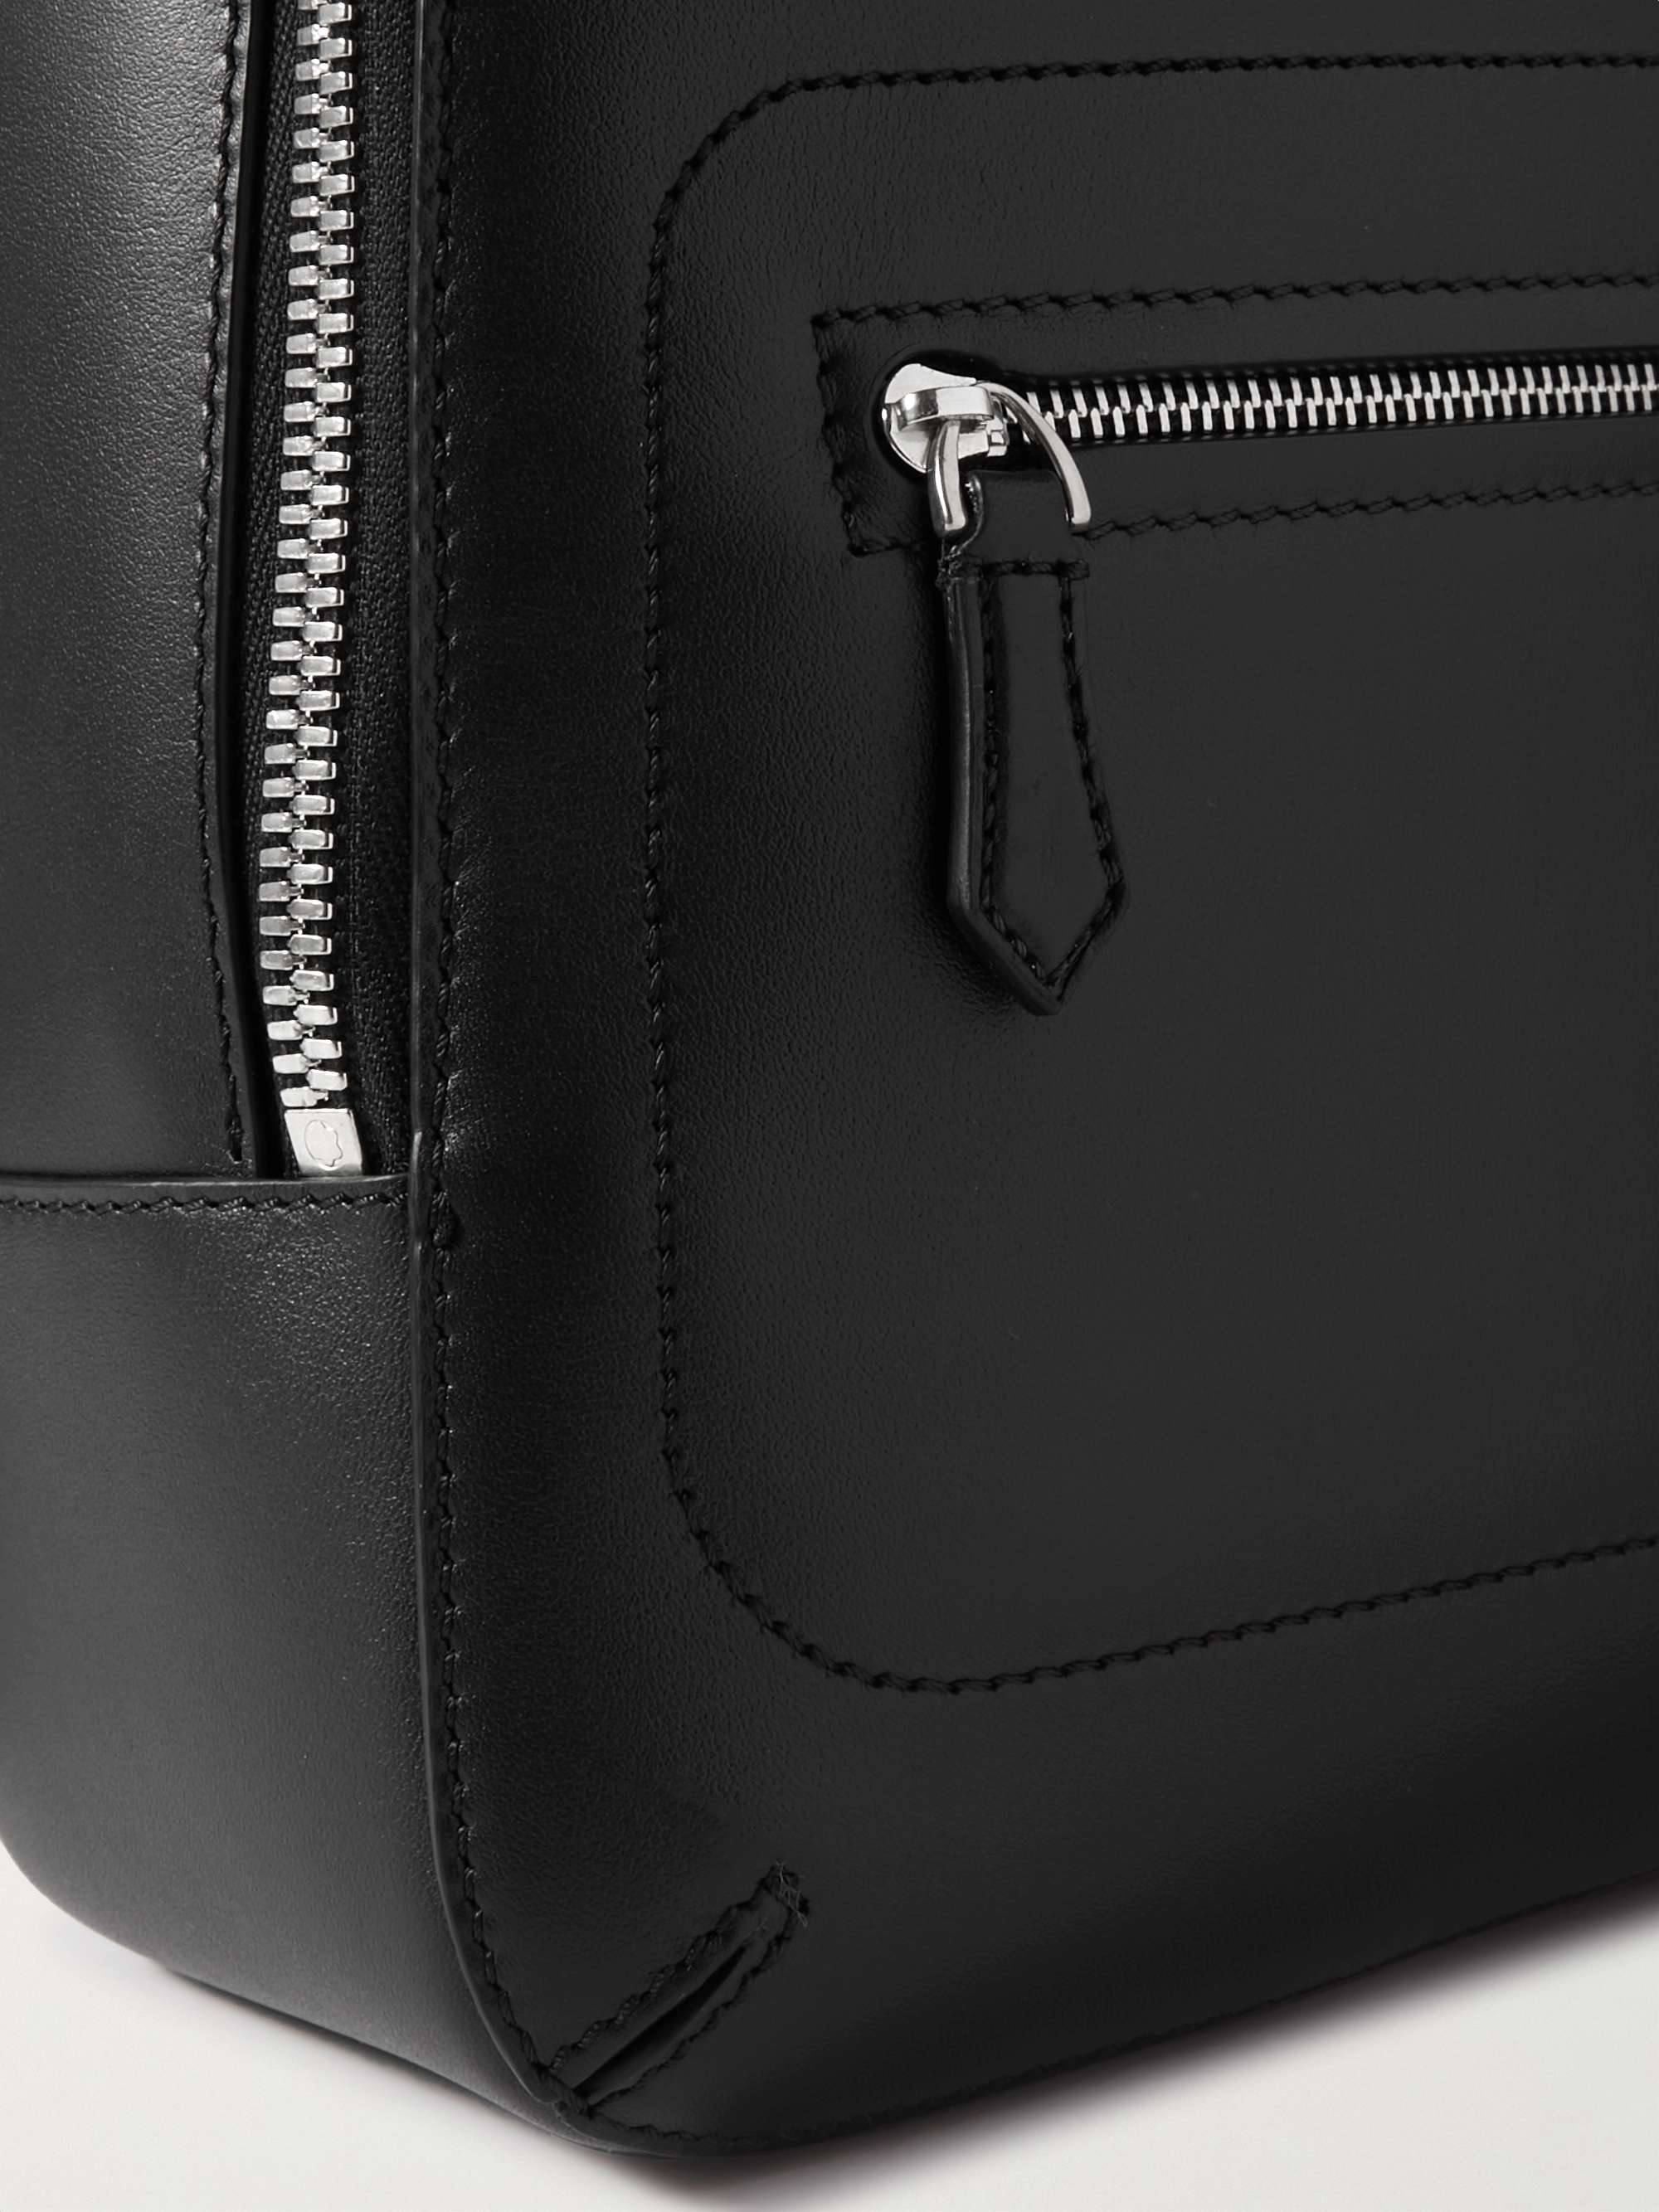 MONTBLANC Meisterstück Leather Backpack